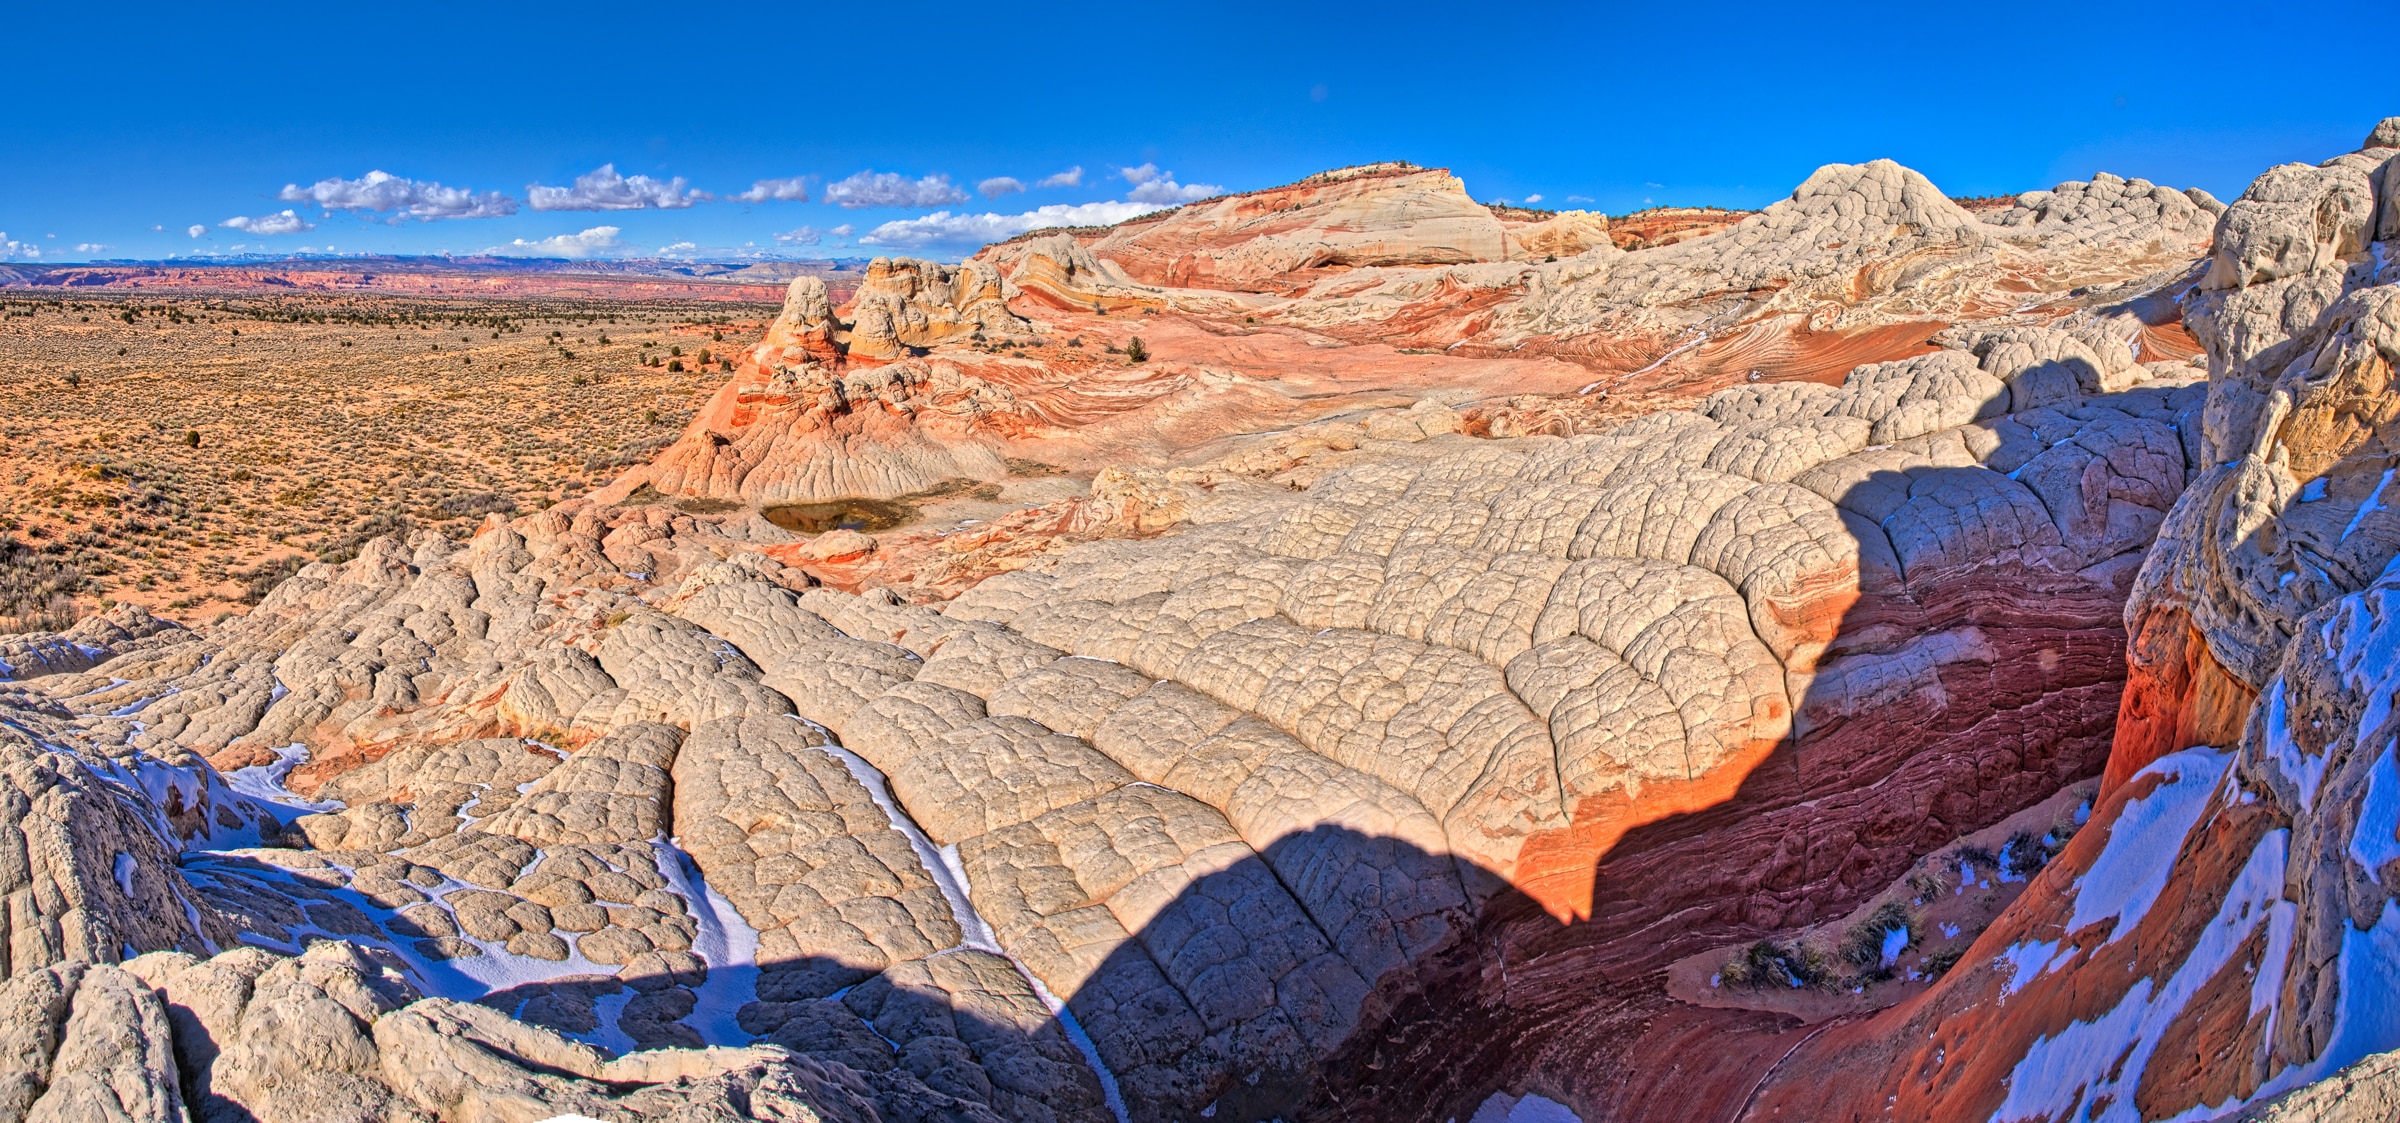 This panoramic view shows the Navajo Sandstone brain rock and the brilliant red swirls in Vermillion Cliffs National Monument.